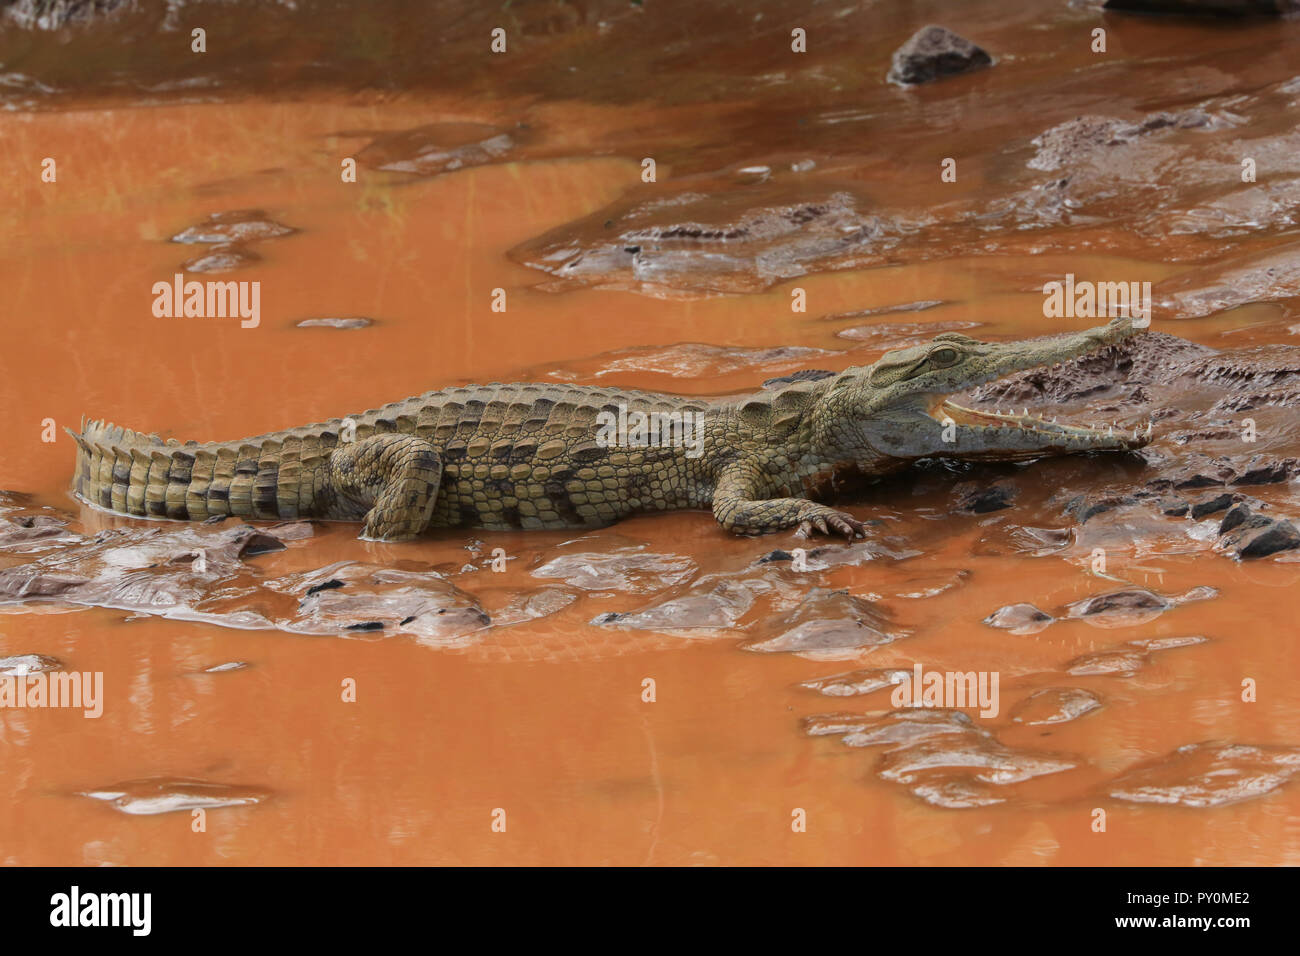 A Nile crocodile laying on the edge of a muddy pond in the Buffalo Springs National Reserve in Kenya, East Africa. Stock Photo